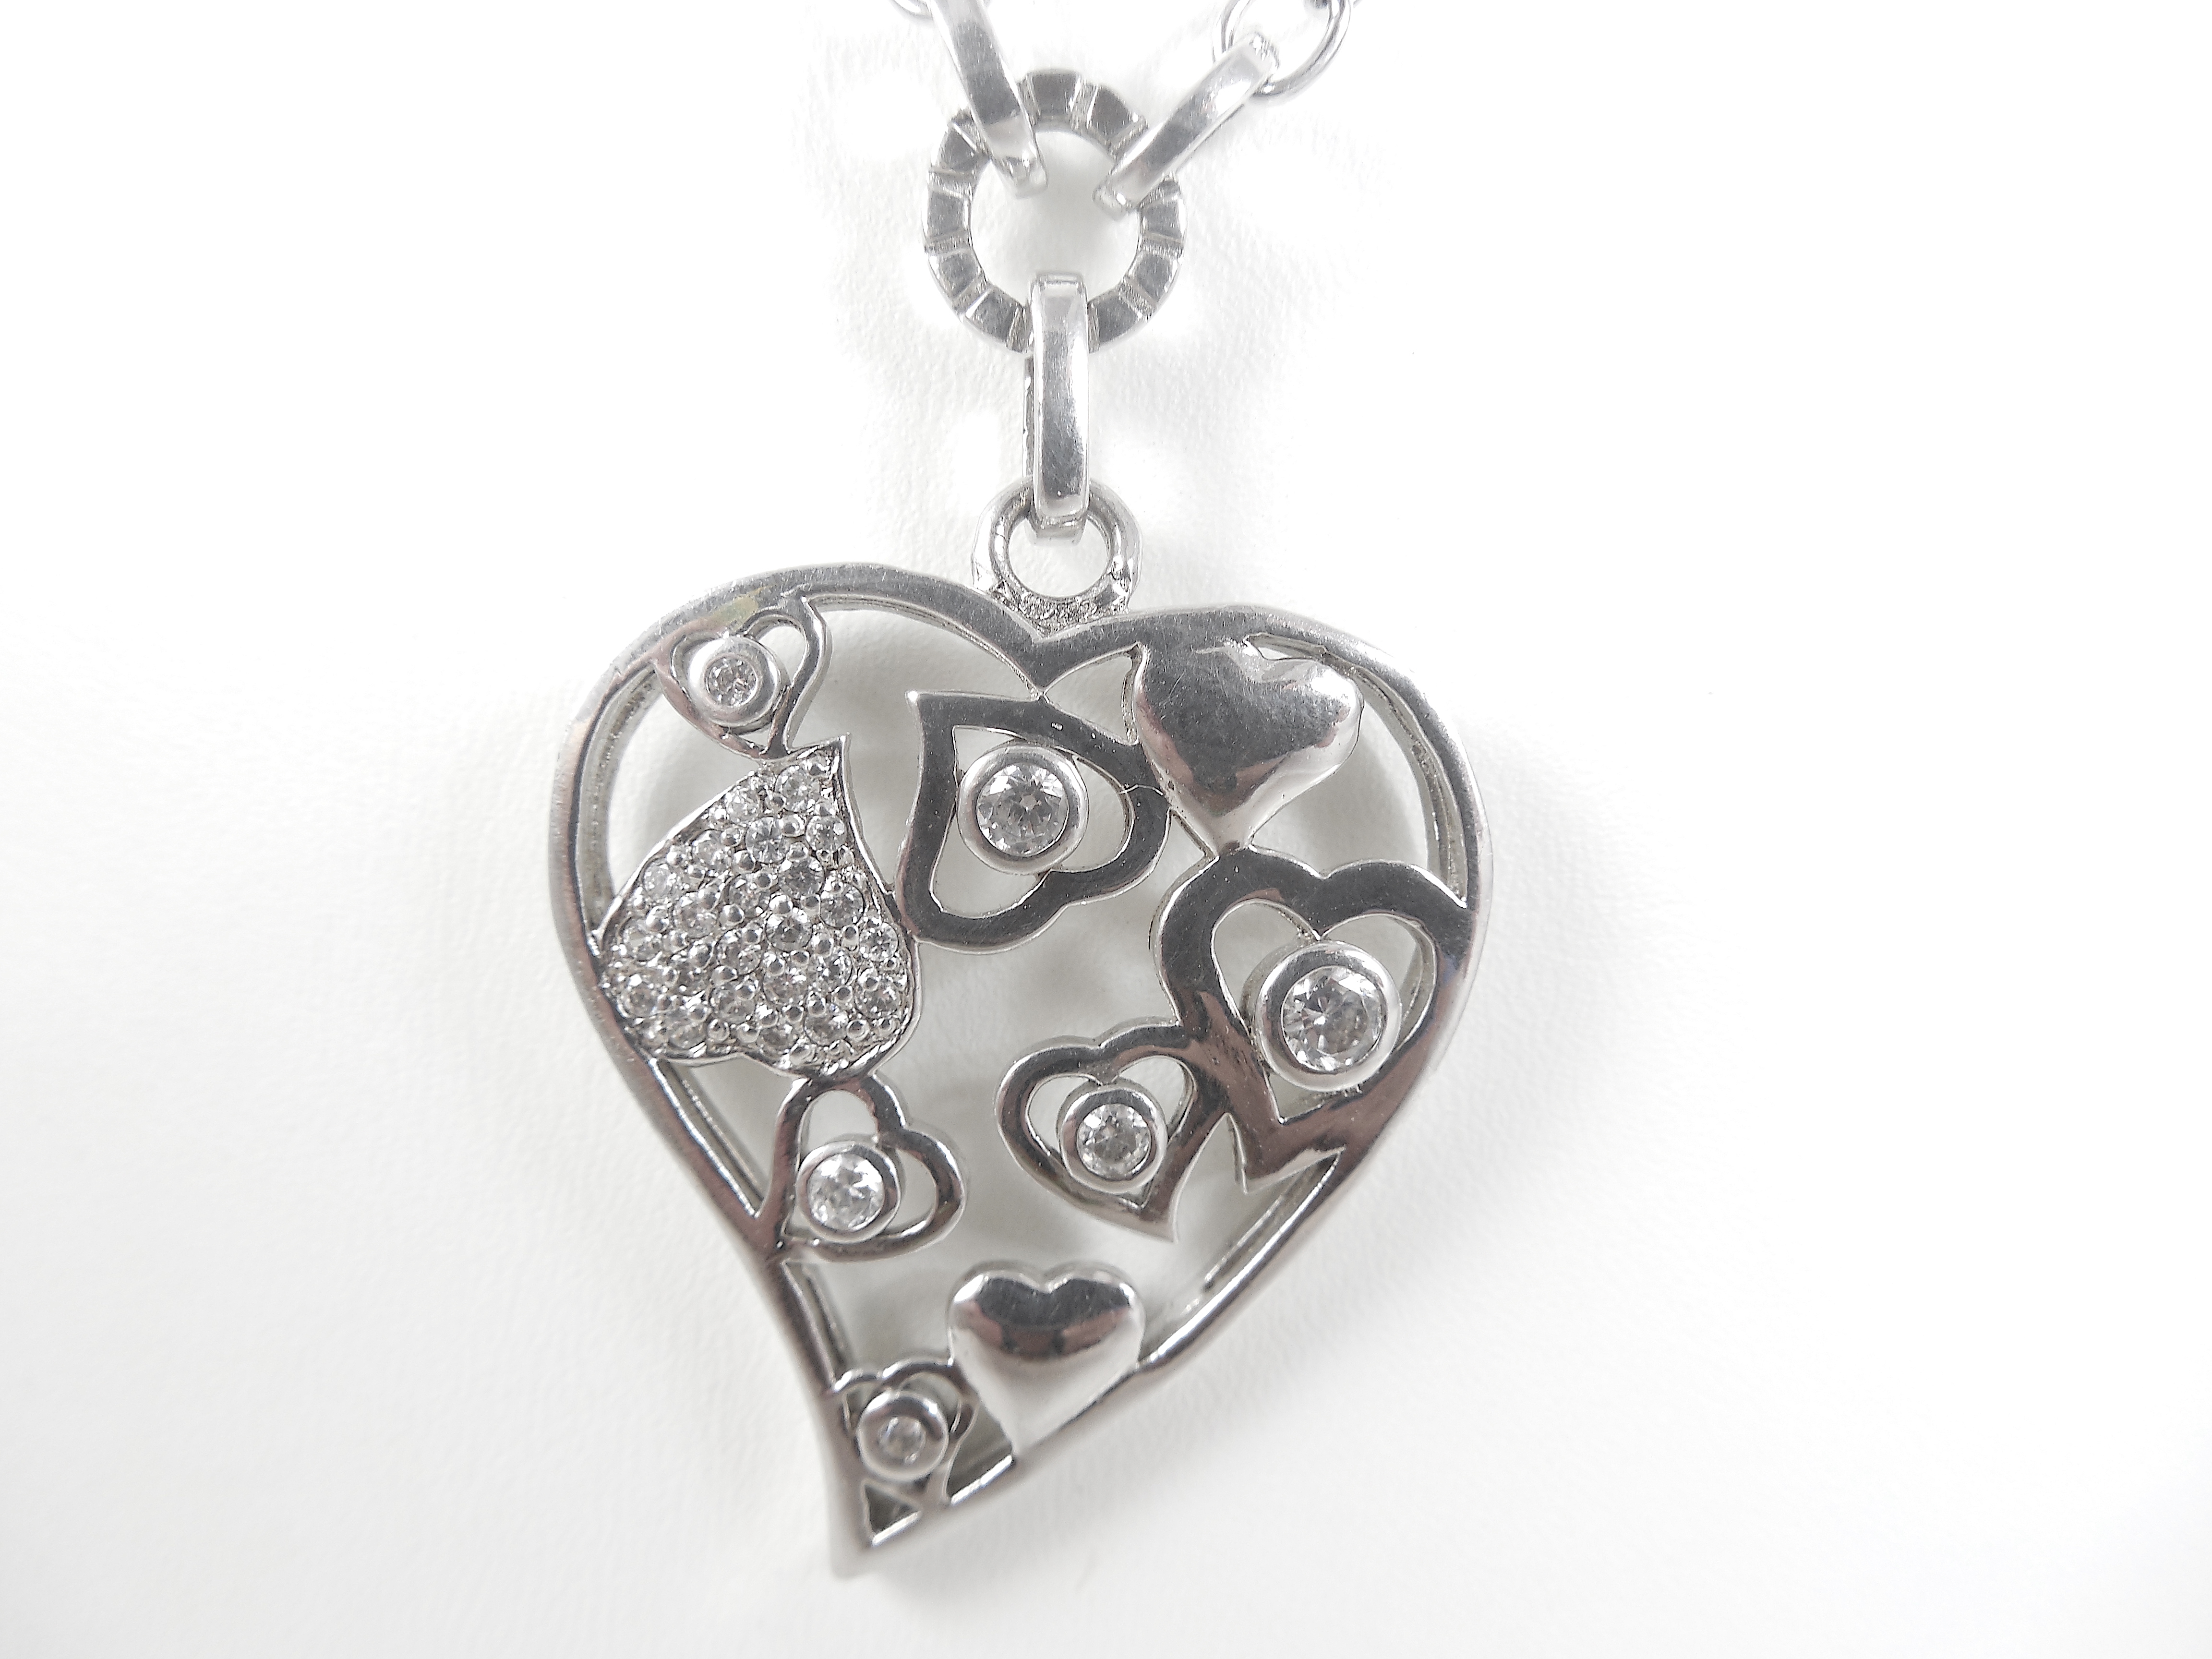 Heart shaped silver neklace - Image 3 of 4